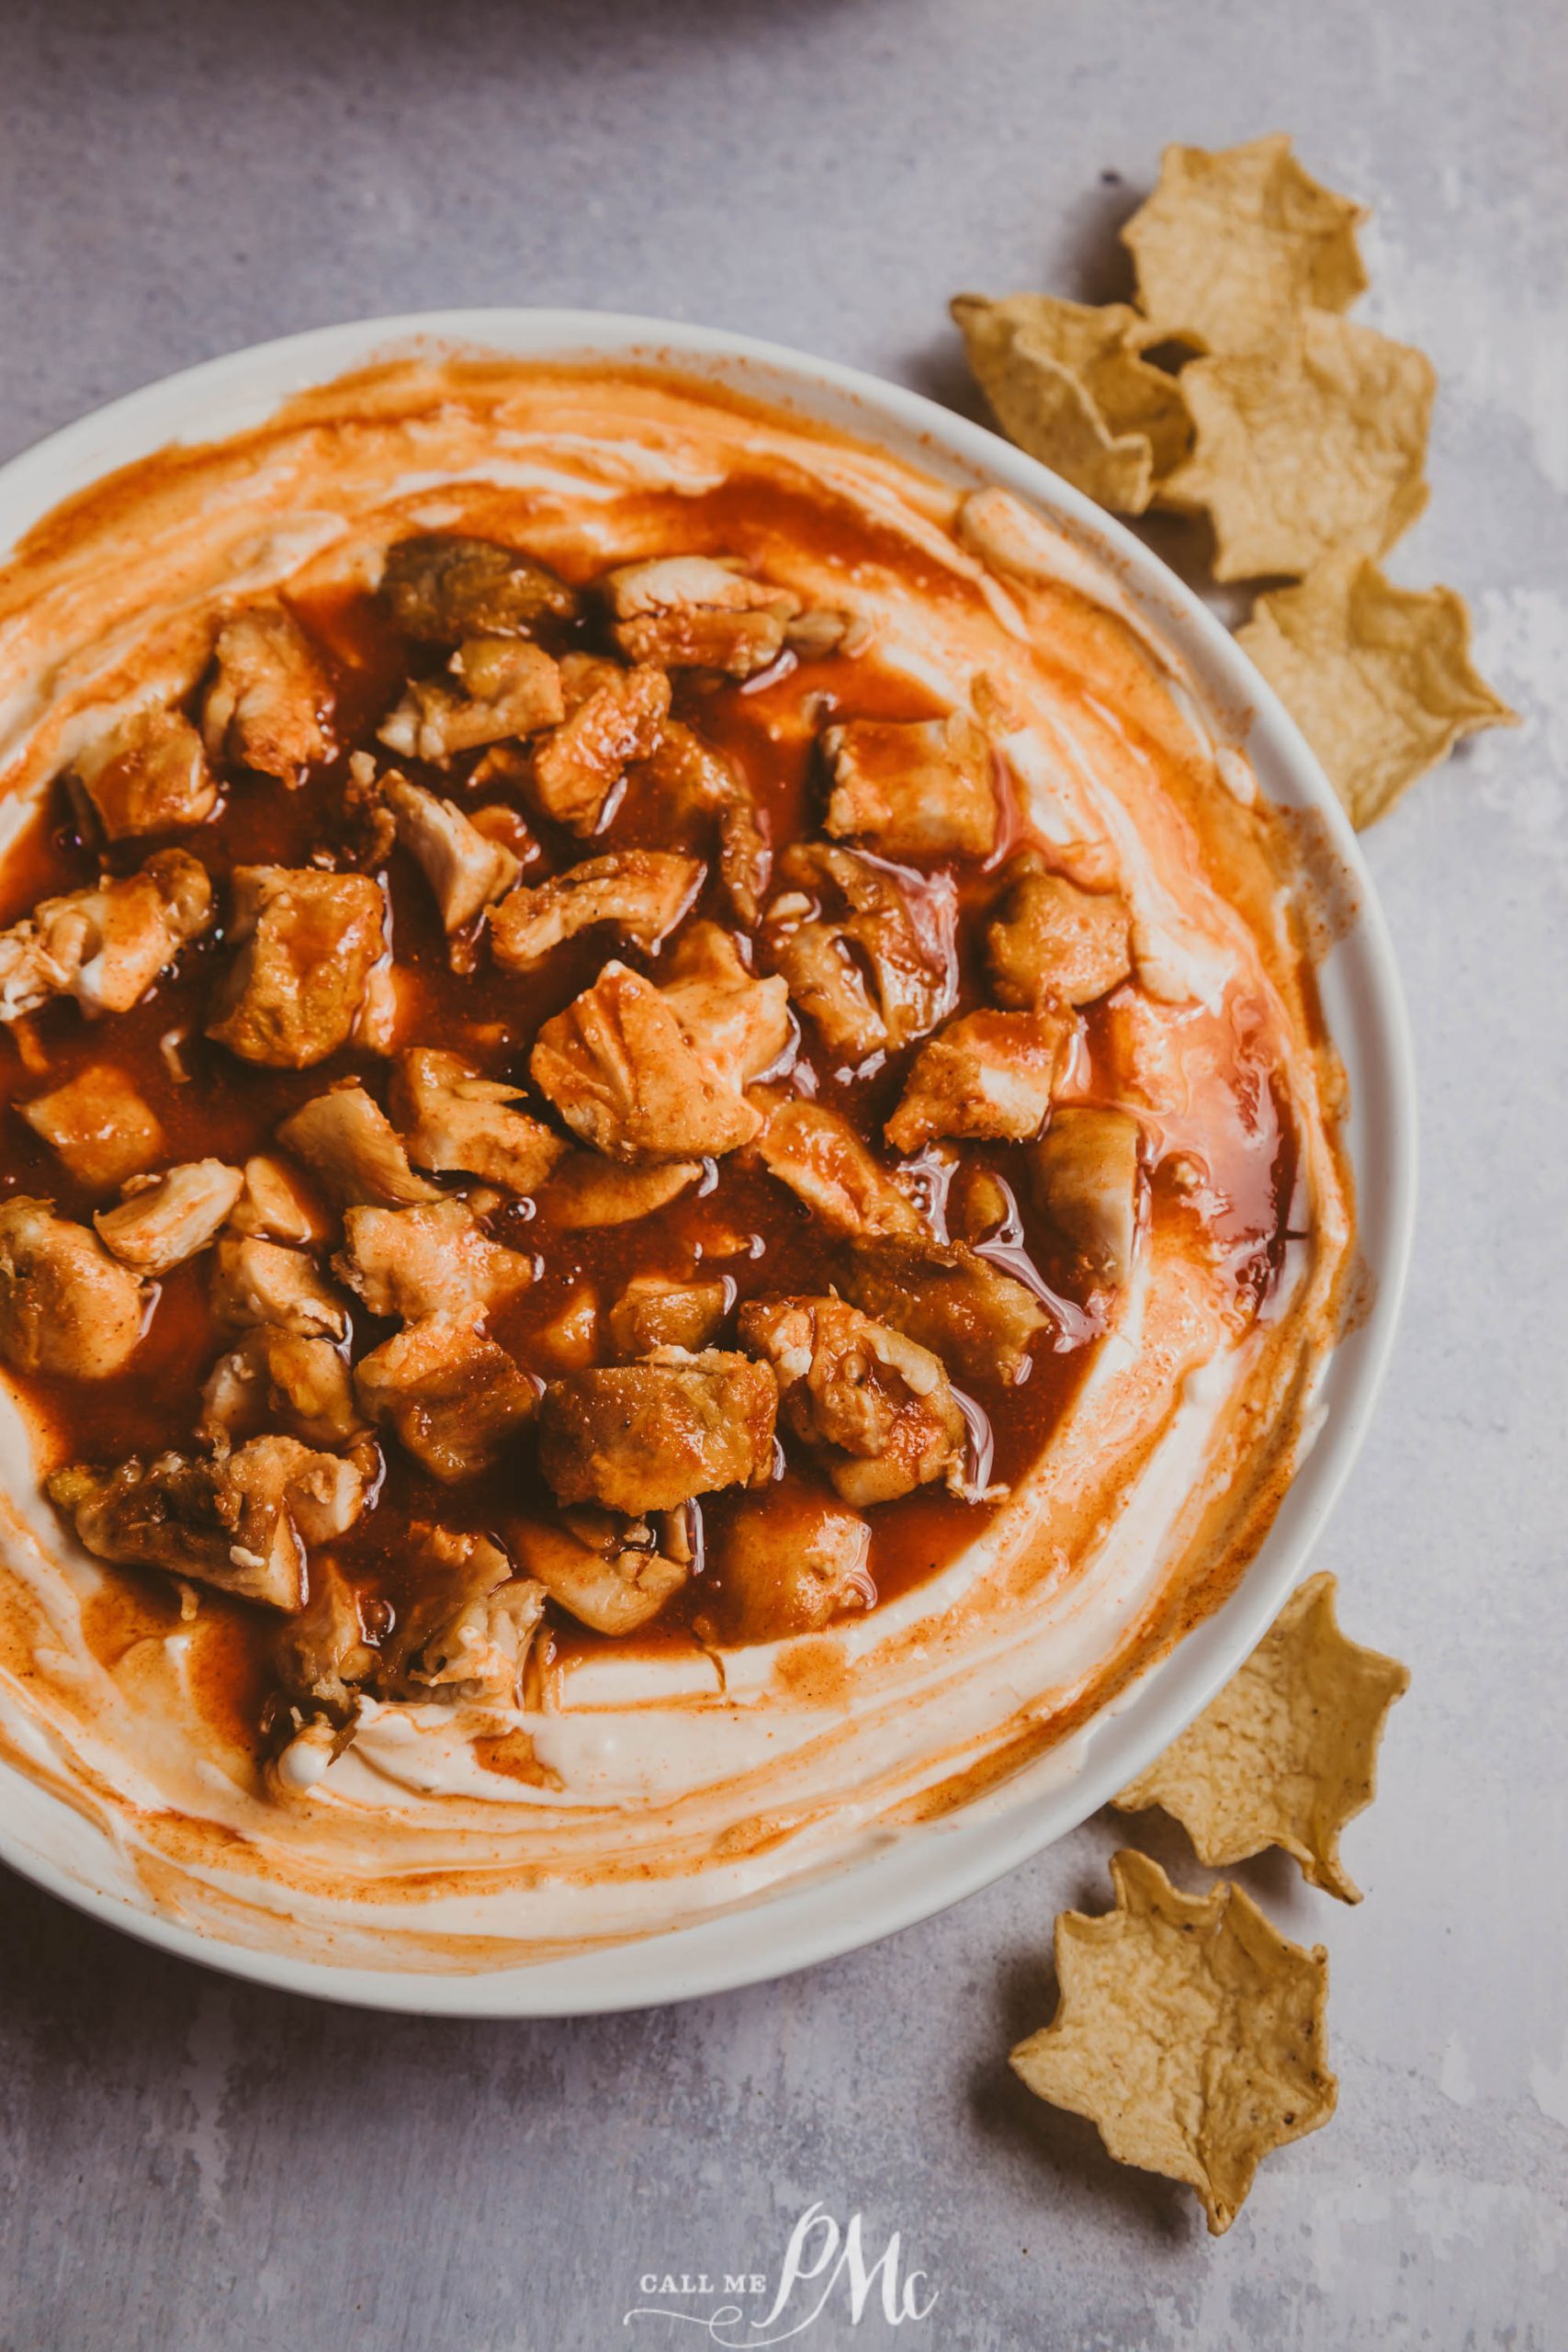 A bowl of dip with chicken and sauce on it.